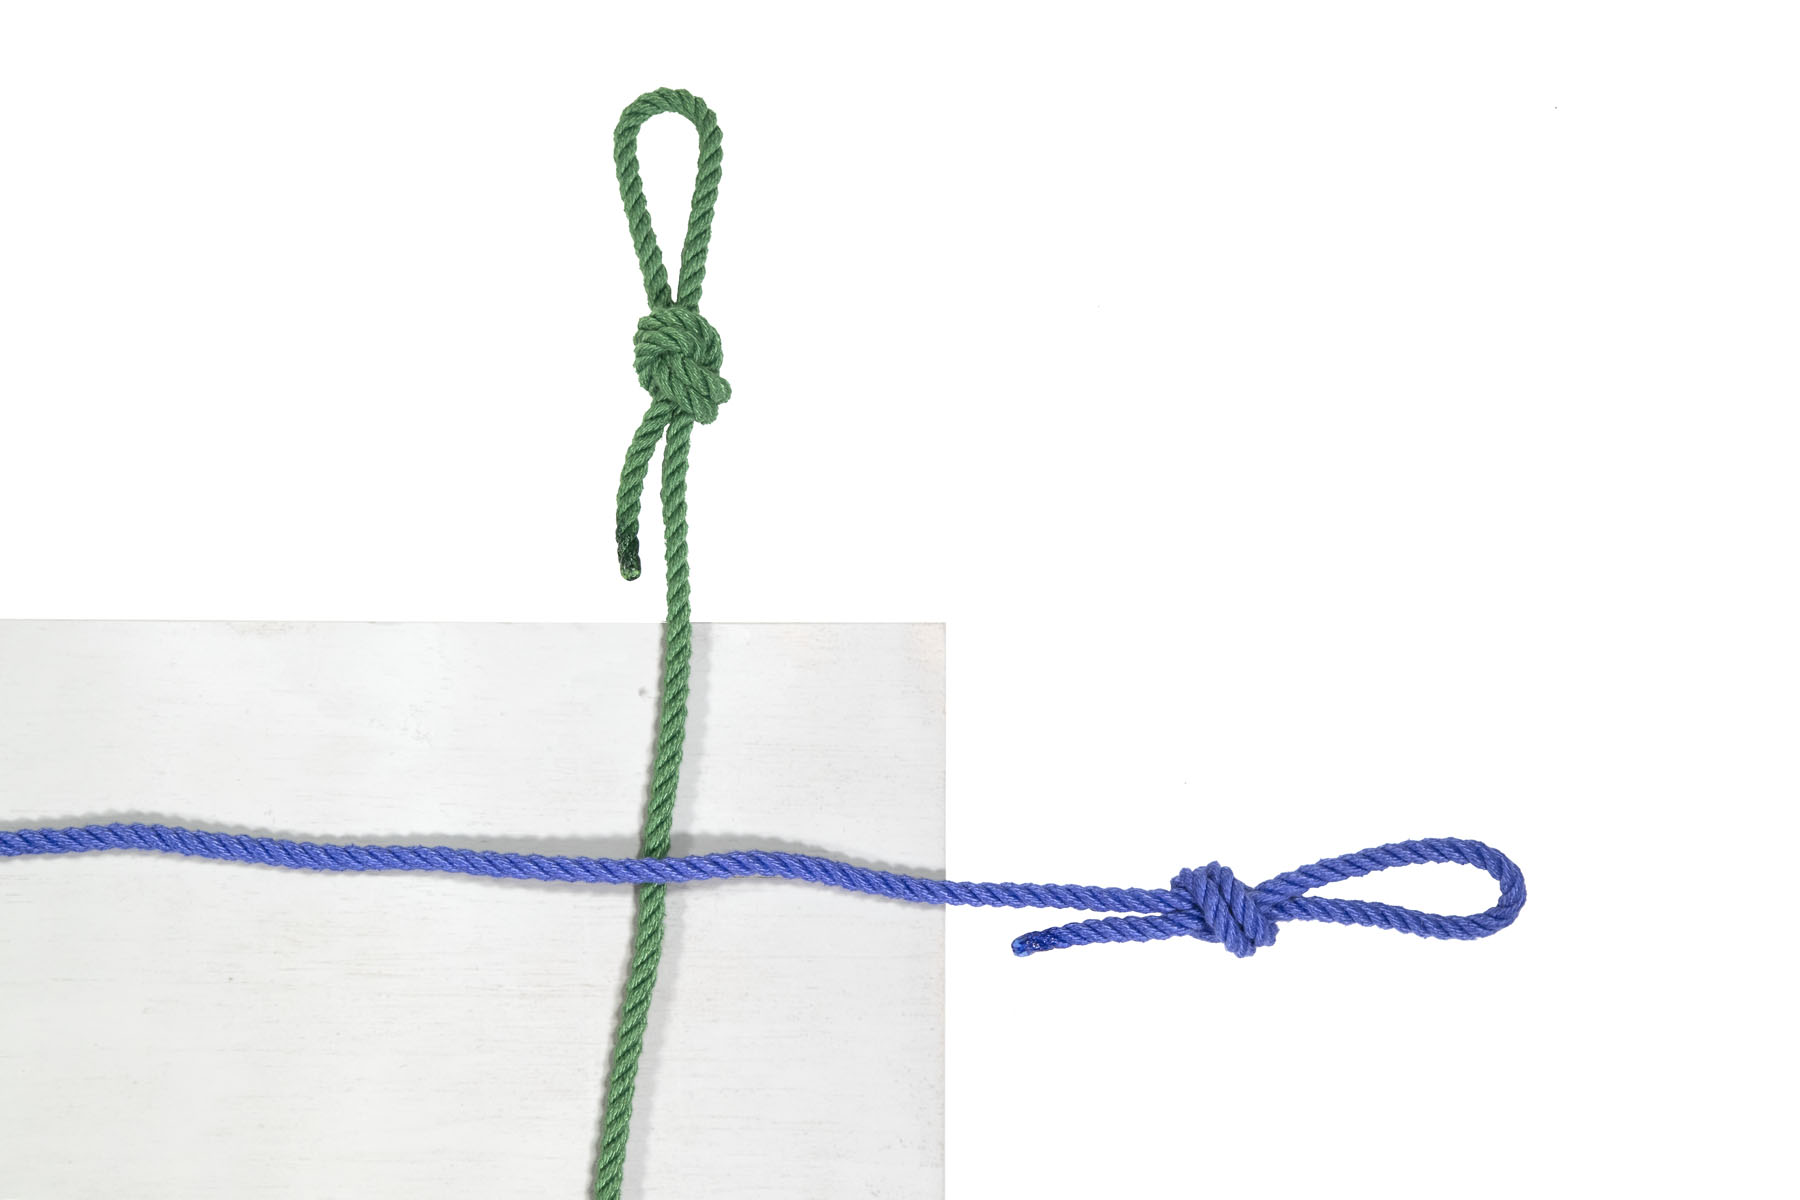 This is a closeup view of the top right corner of the board. A green rope crosses the board vertically, about three inches inside the right edge of the board and a blue rope crosses the board horizontally, about three inches below the top edge of the board. The ends of both ropes have been tied in overhand loop knots, making loops that are about three inches long.